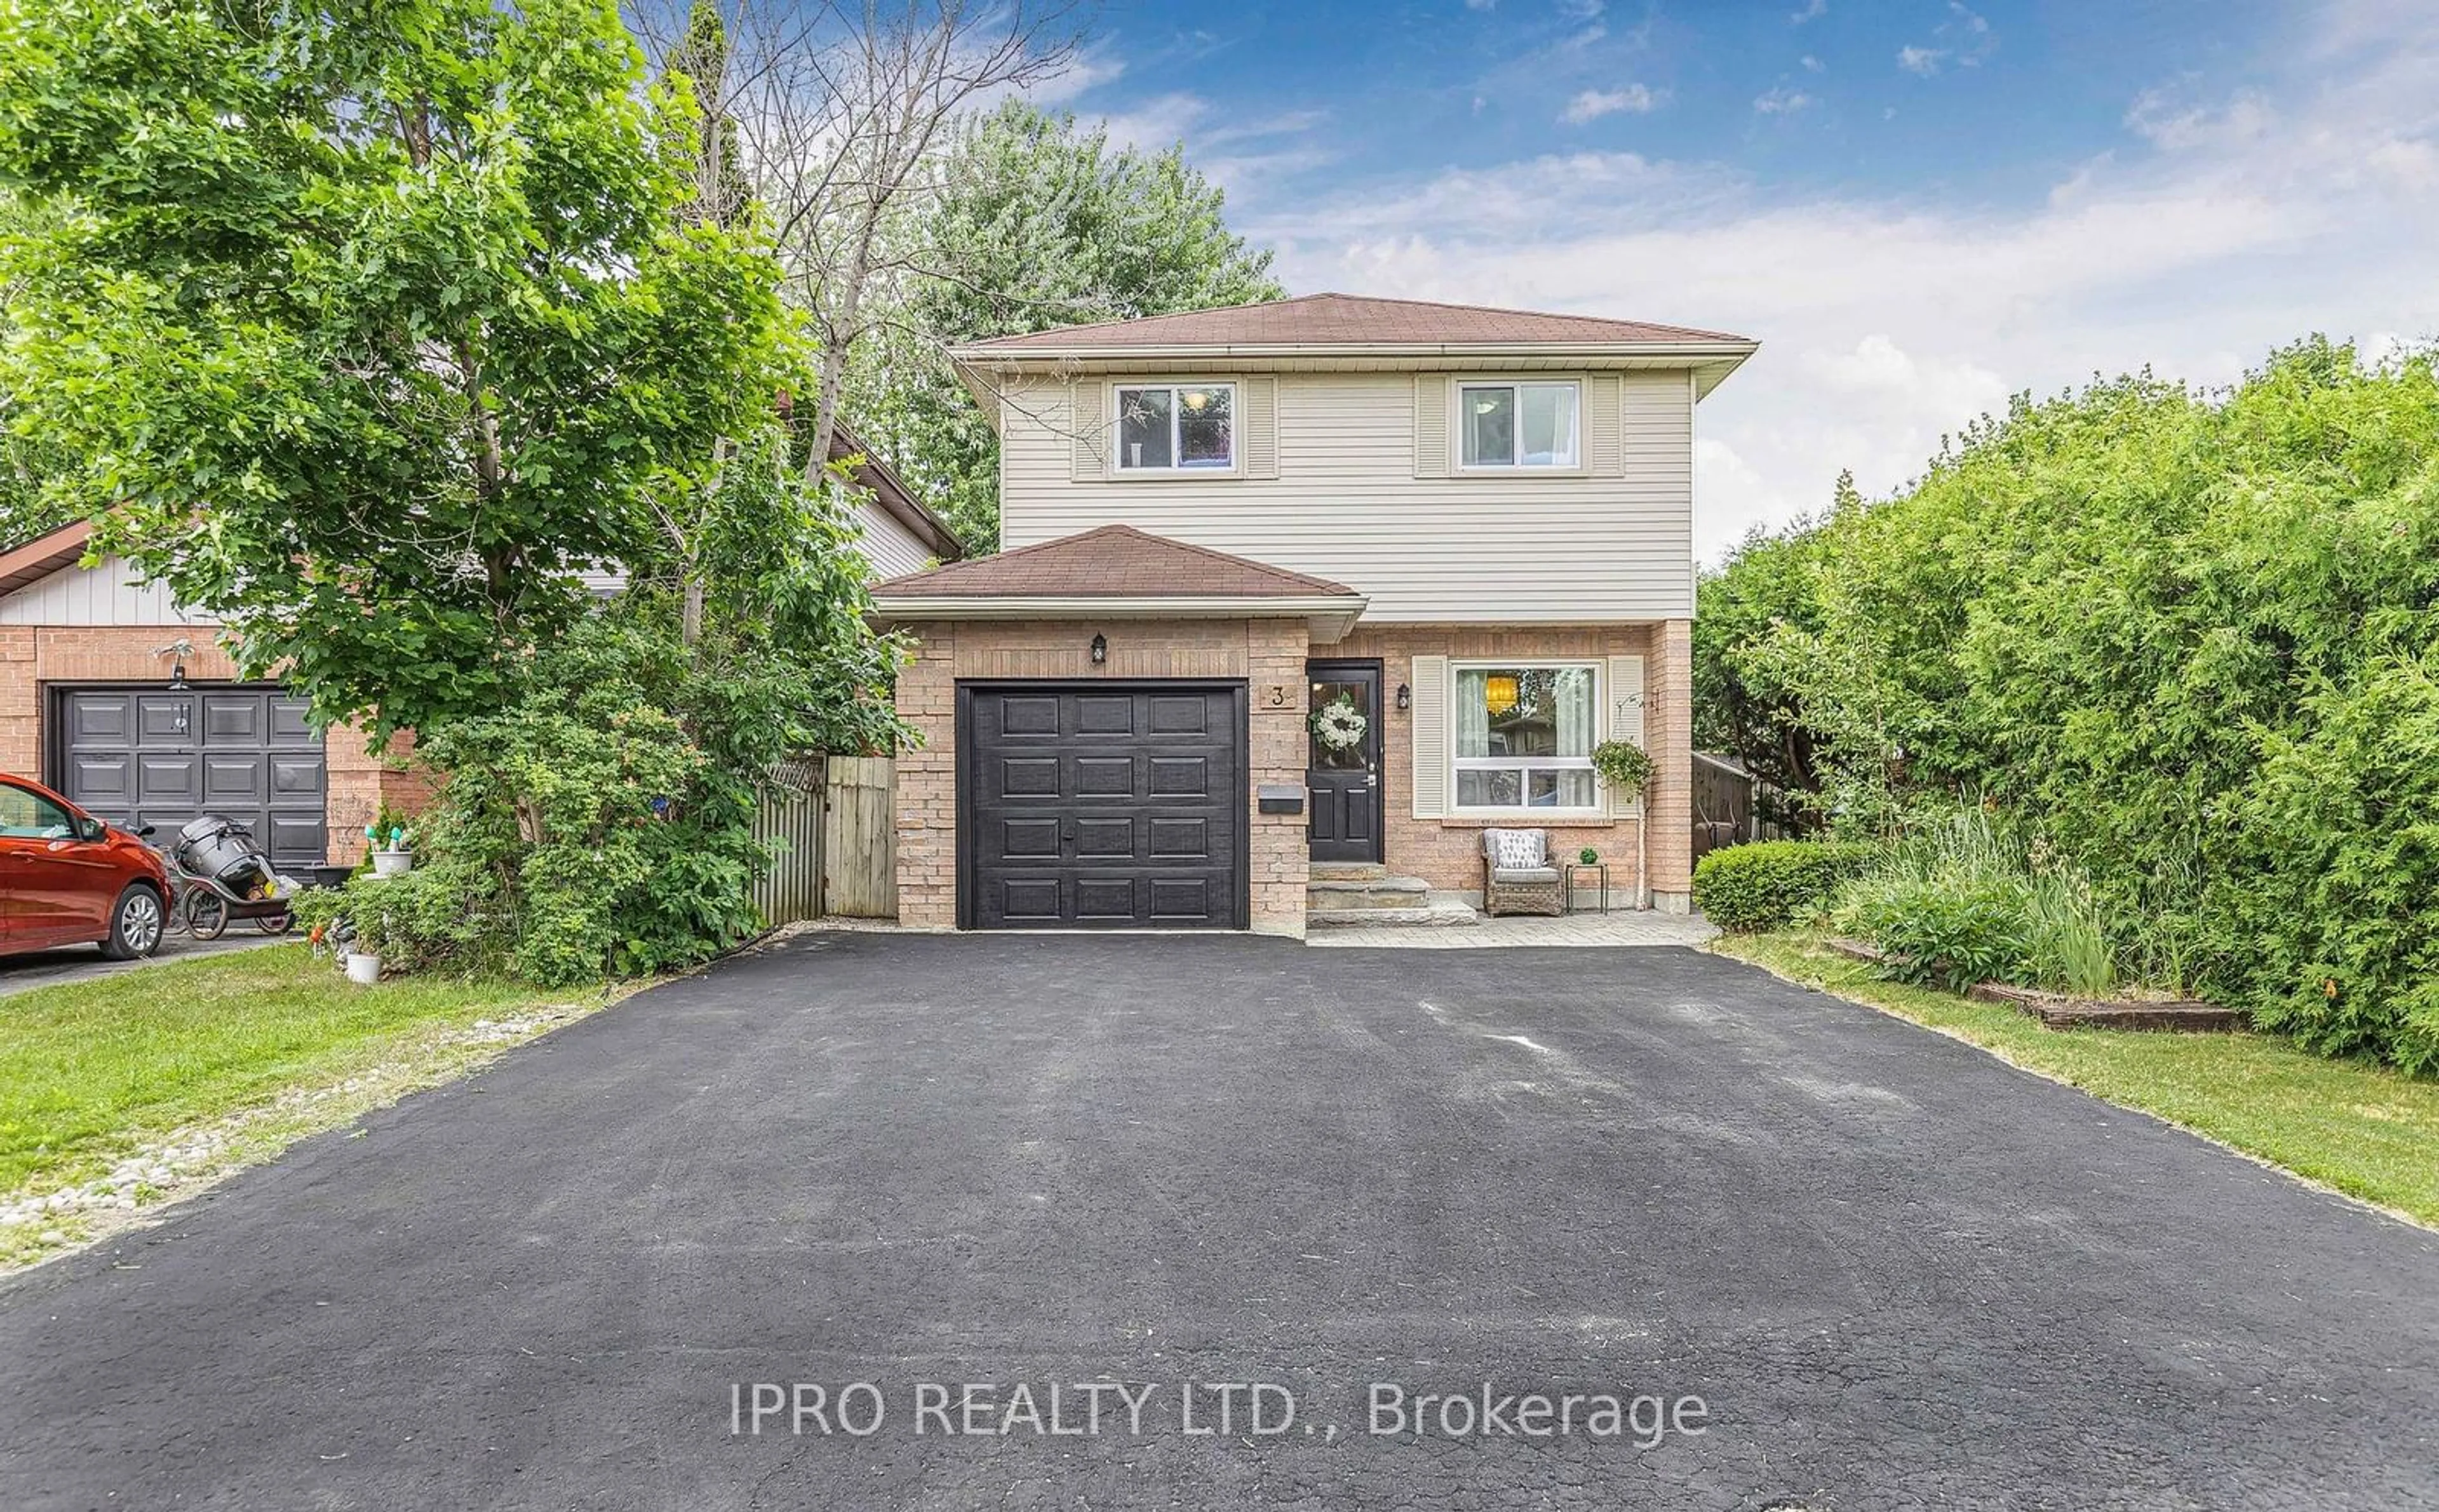 Frontside or backside of a home for 3 Courtice Cres, Collingwood Ontario L9Y 4N7